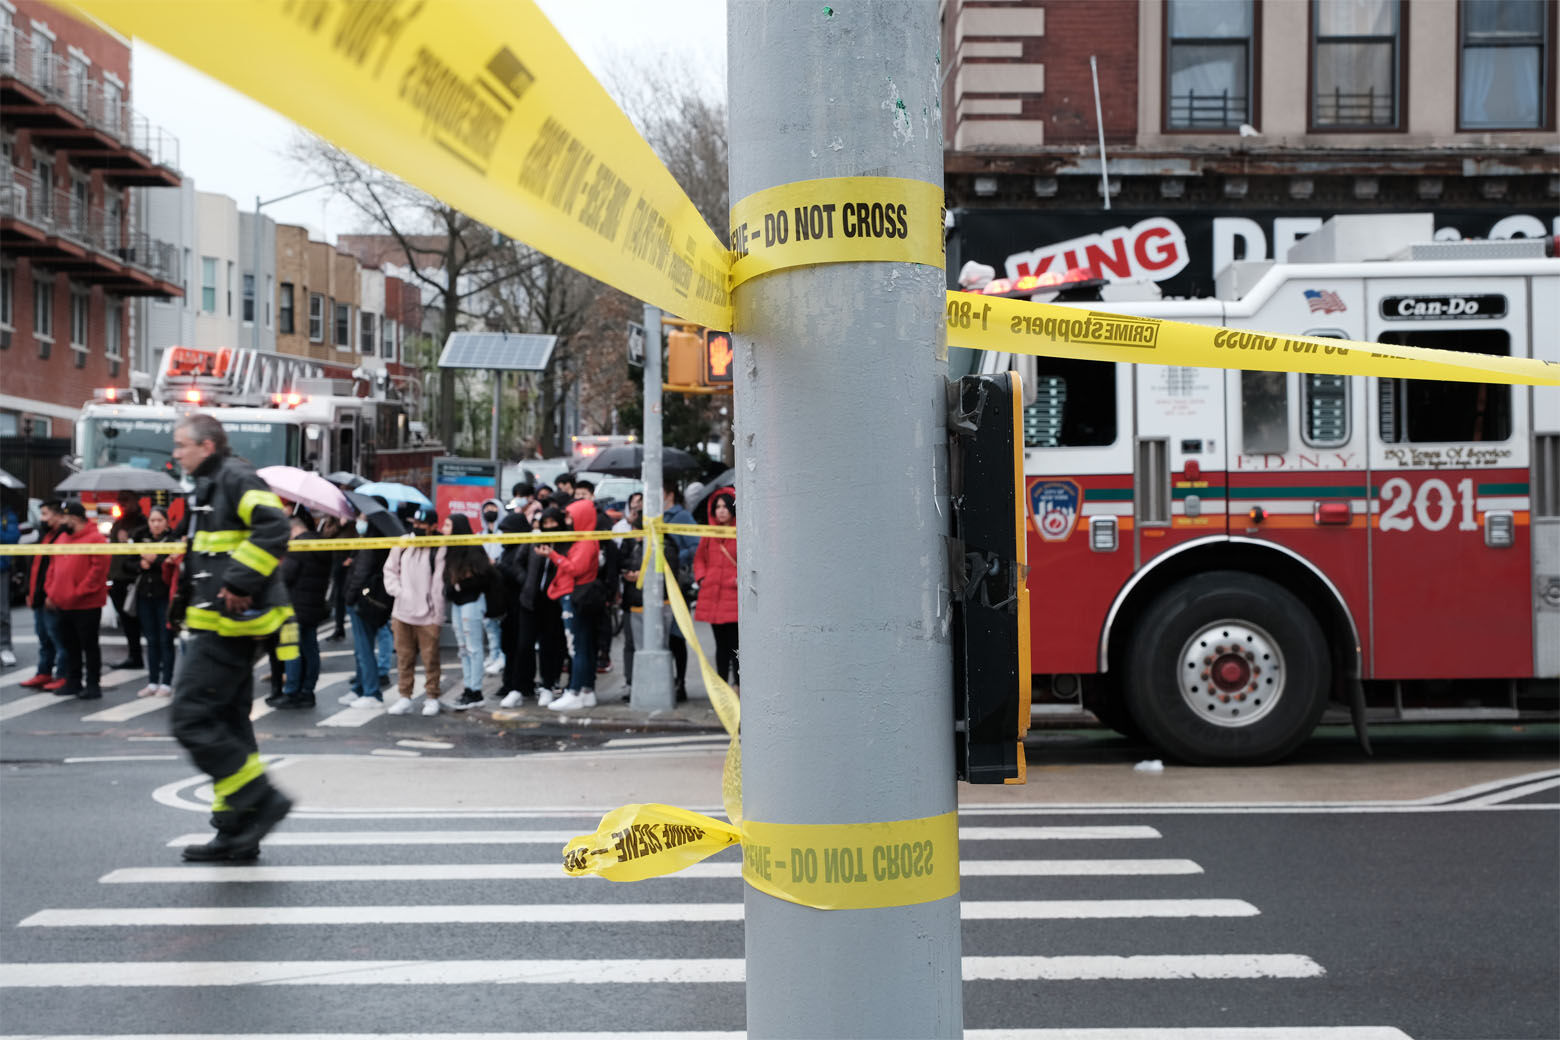 Police and emergency responders gather at the site of a reported shooting of multiple people outside of the 36 St subway station on April 12, 2022 in the Brooklyn borough of New York City. According to authorities, multiple people have reportedly been shot and several undetonated devices were discovered at the 36th Street and Fourth Avenue station in the Sunset Park neighborhood.  (Photo by Spencer Platt/Getty Images)